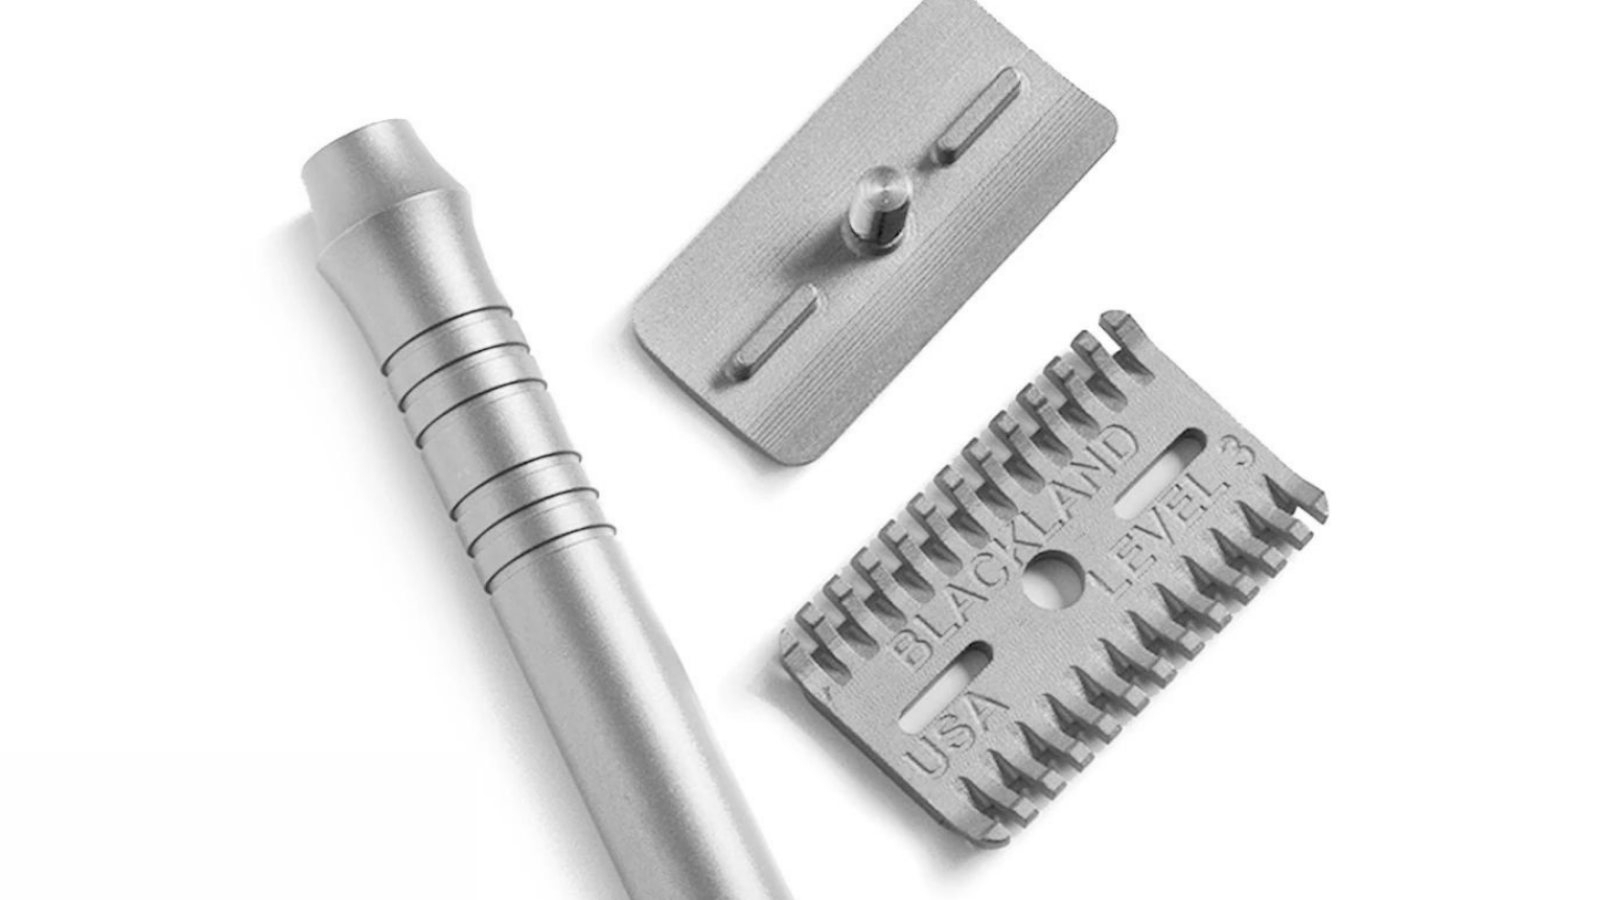 Metallic barber tools including a razor handle, blade holder, and hair thinning razor blade on a white background.